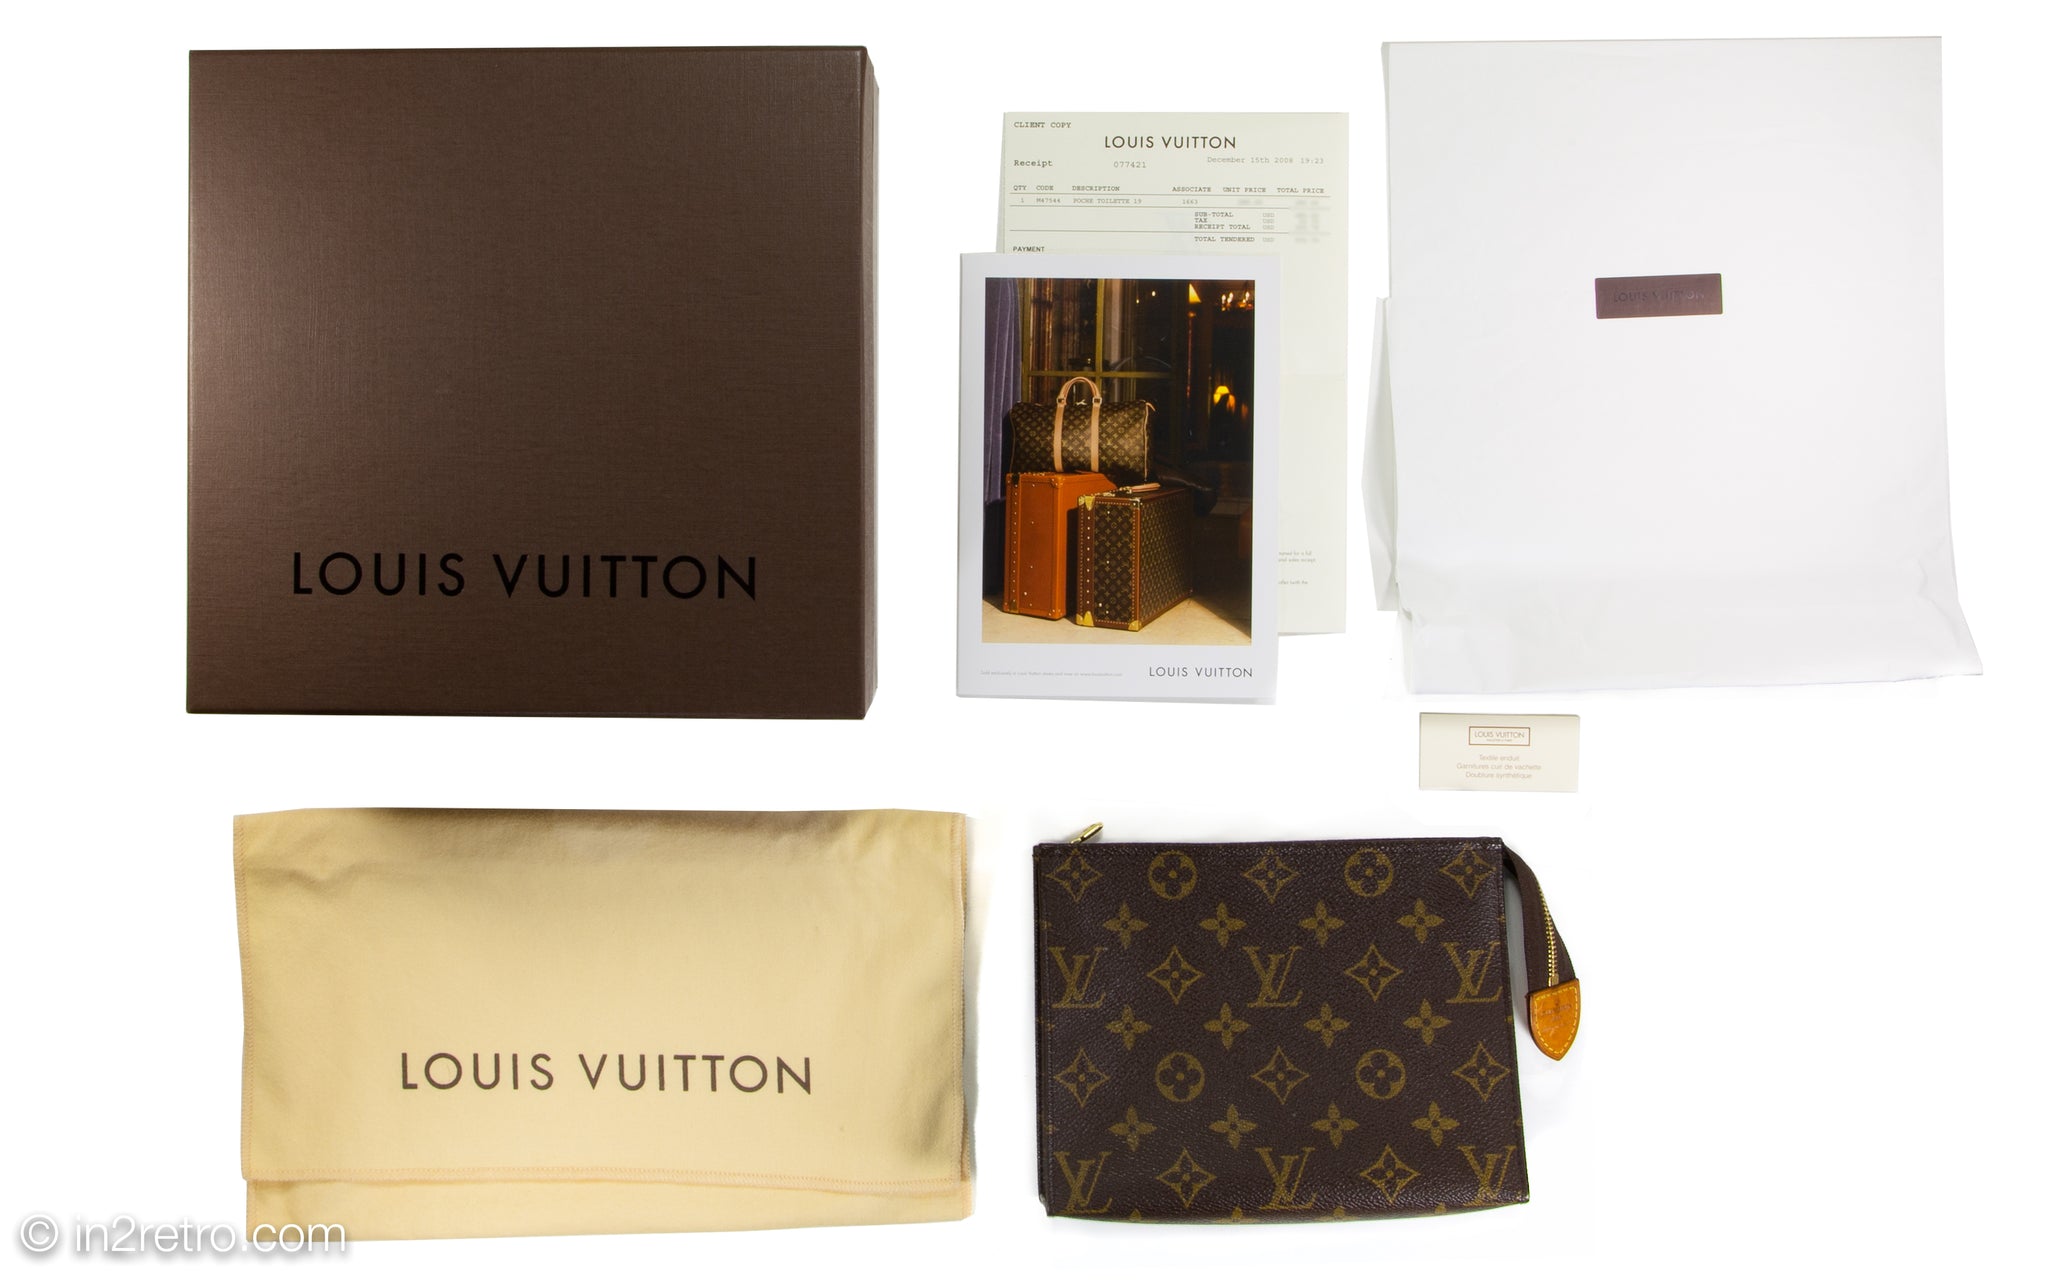 vuitton packaging boxes